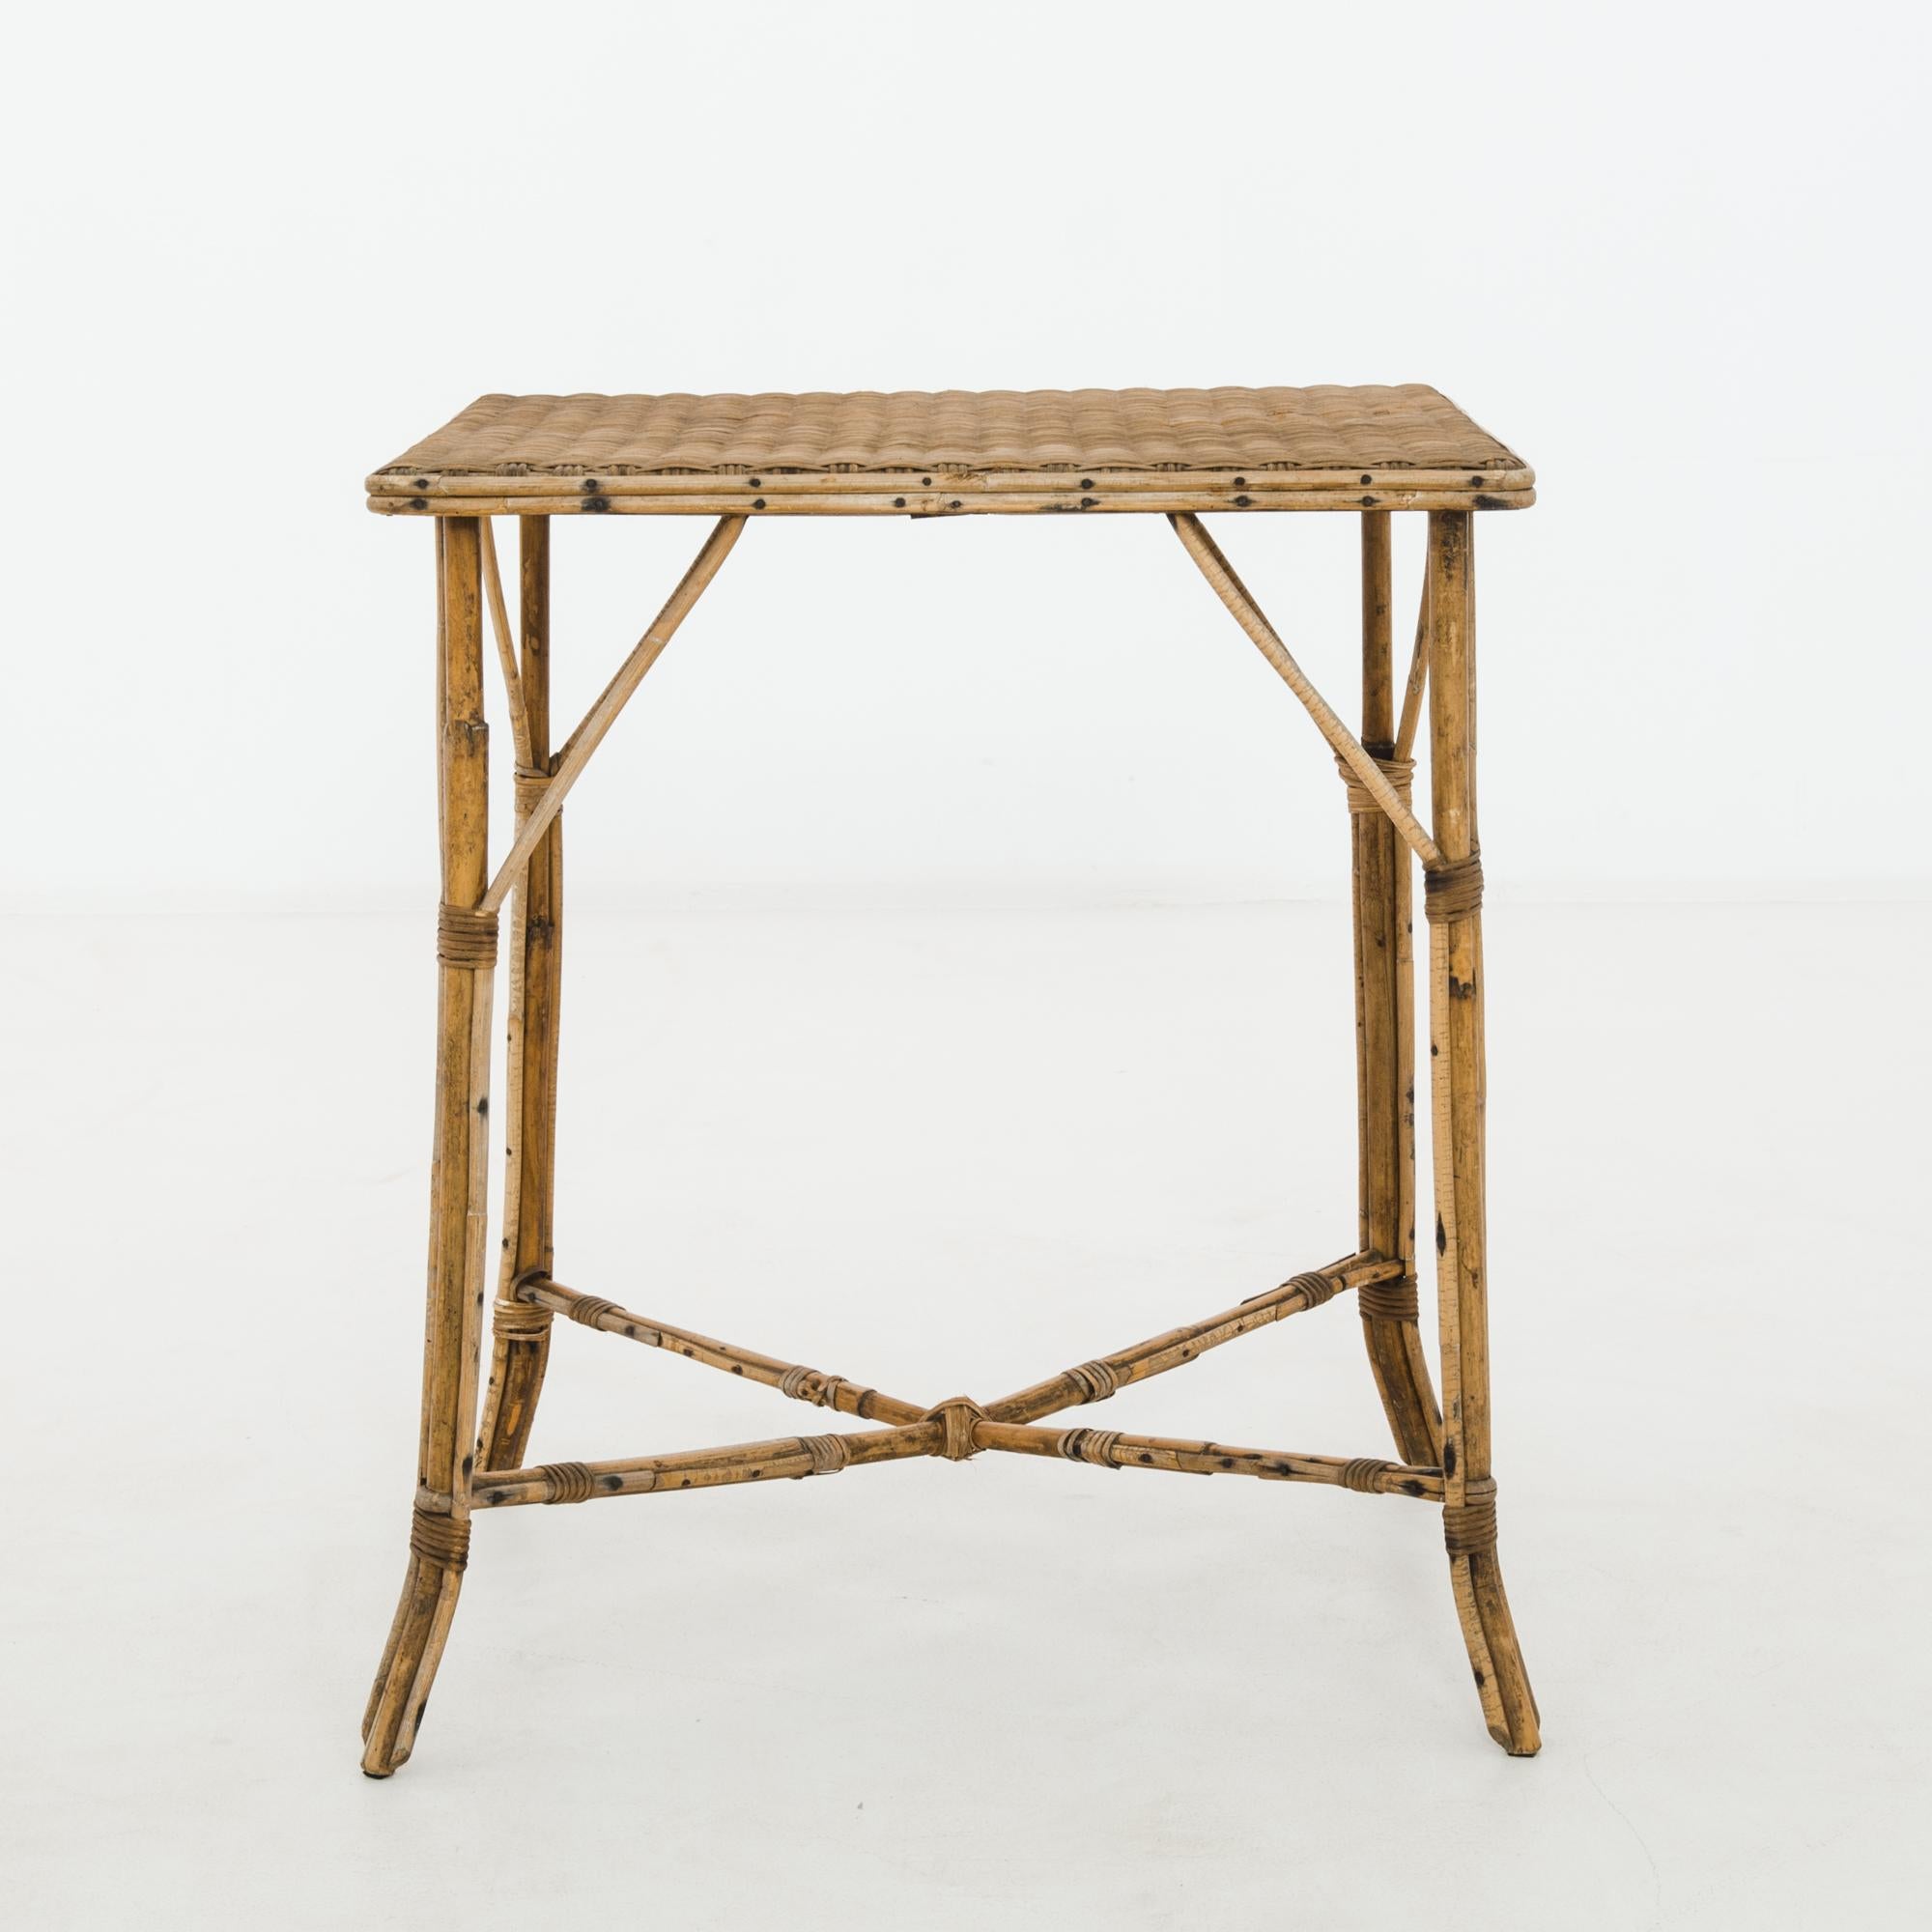 A rattan table from France, produced circa 1920. Bundles of lashed stalks, connected in the middle via x-shaped stretcher, support a tightly woven rattan tabletop in this featherweight table that invokes warm weather climes.